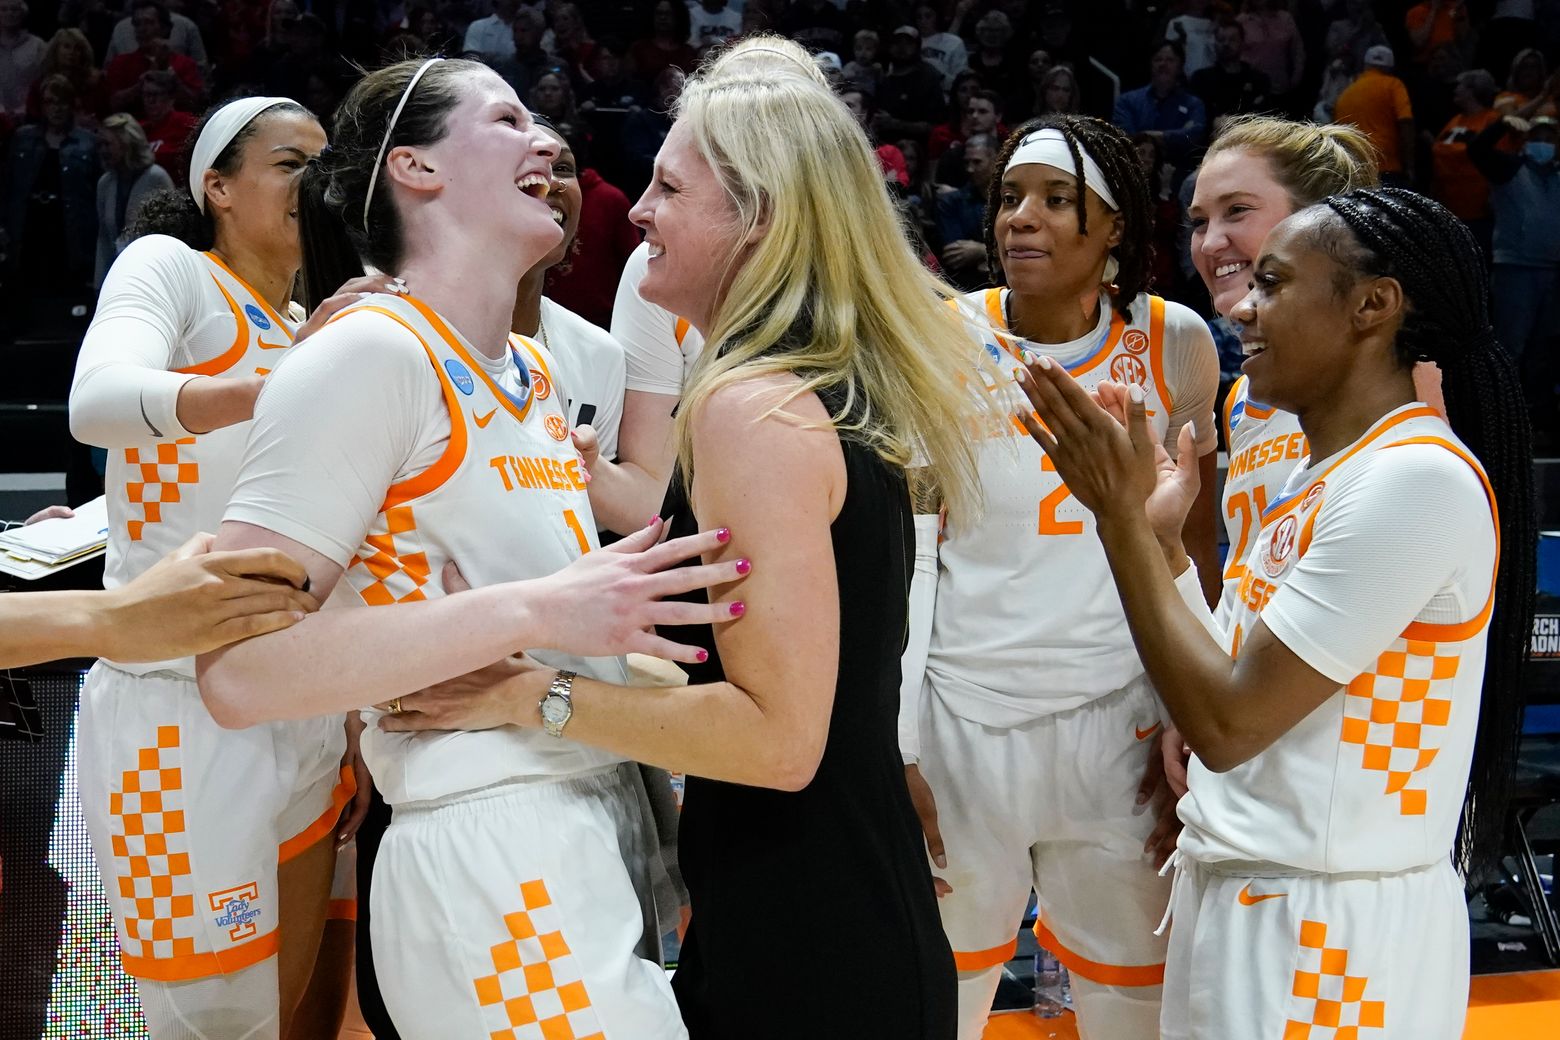 Tennessee back in women's Sweet 16 after 6-year absence | The Seattle Times